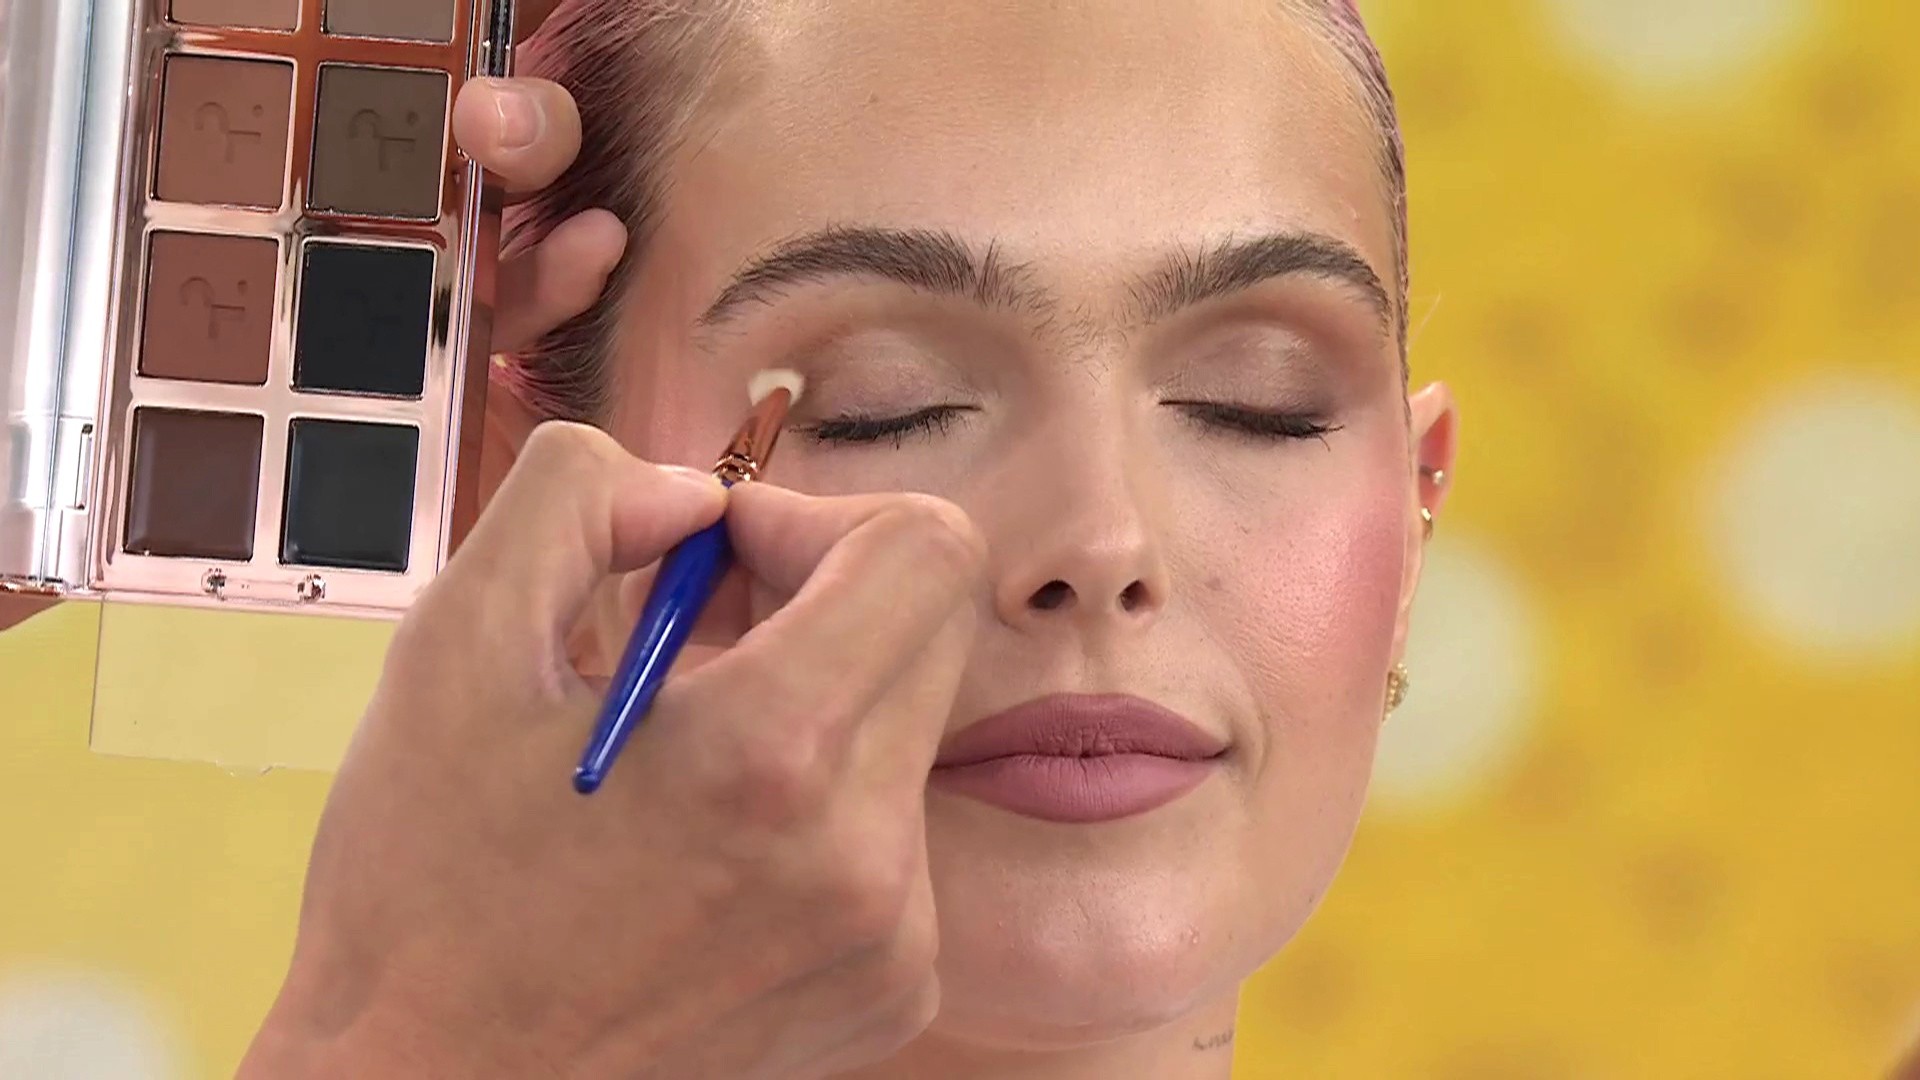 Peek into Makeup Artist @patidubroff's swatch book to see how she